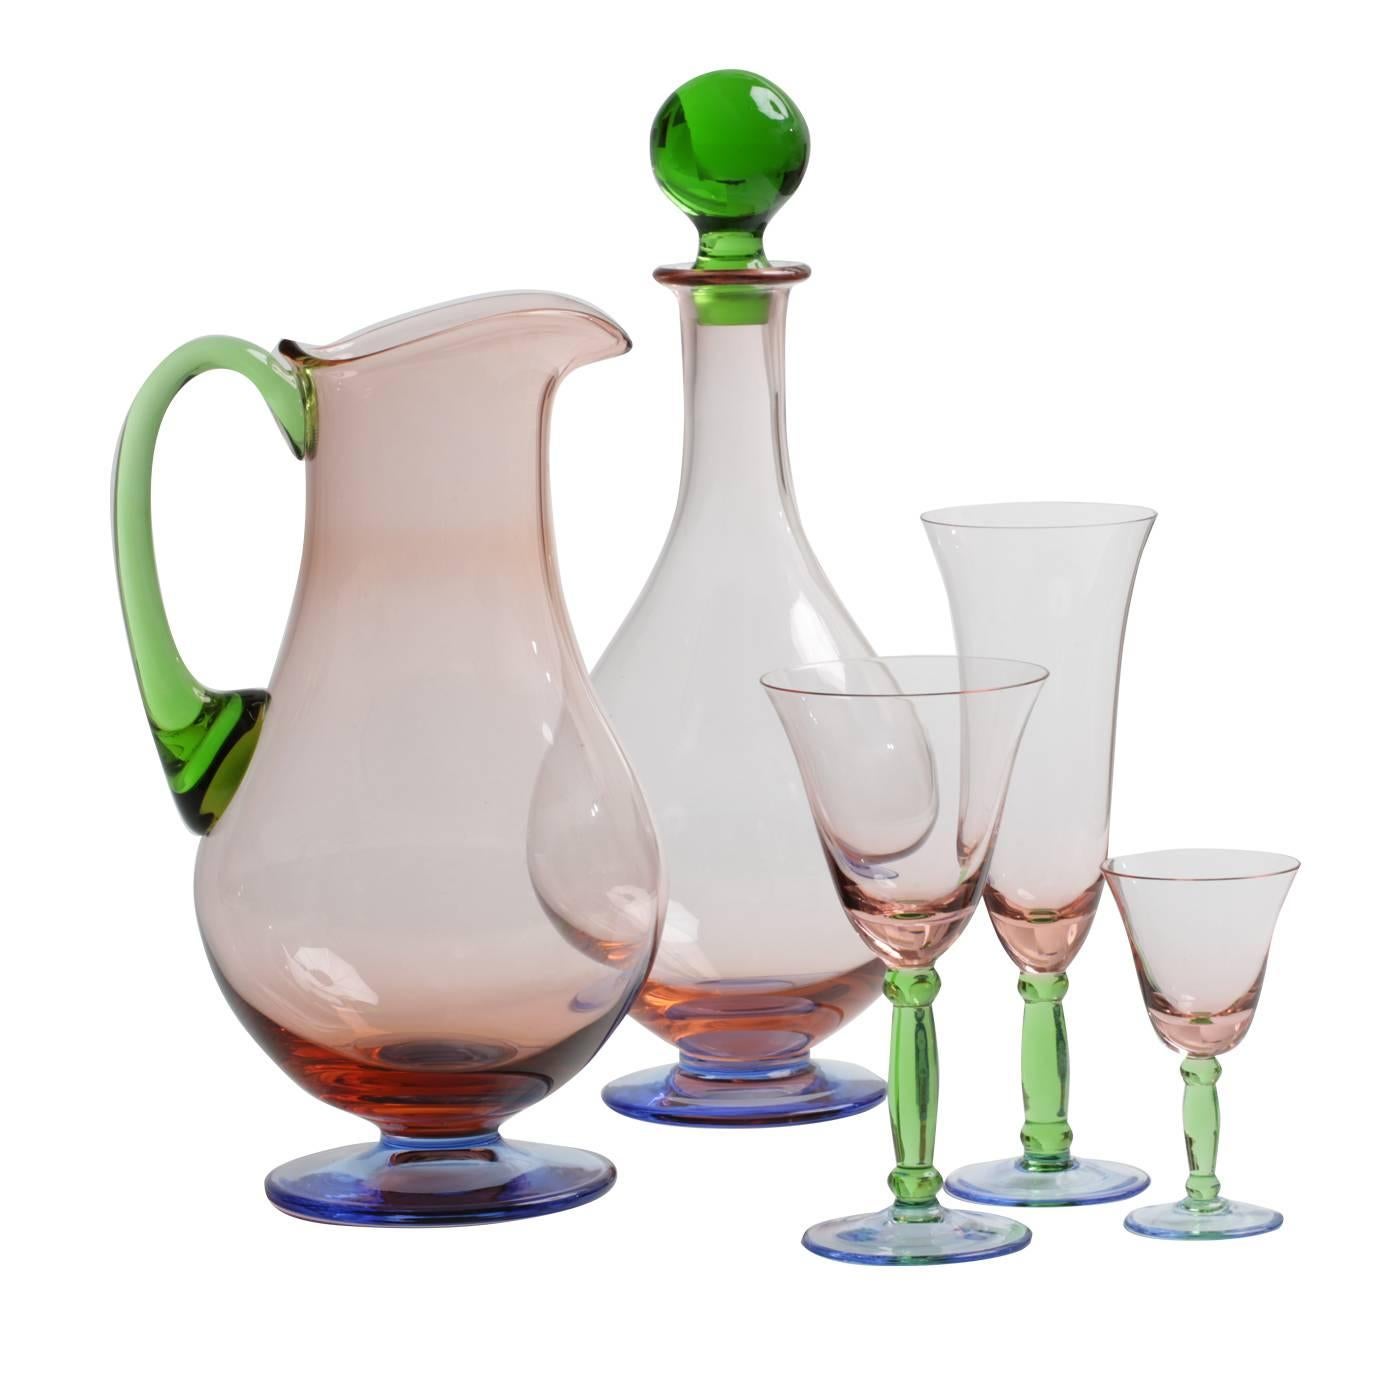 Burano Set of Pitcher and Bottle and Three Glasses for Six